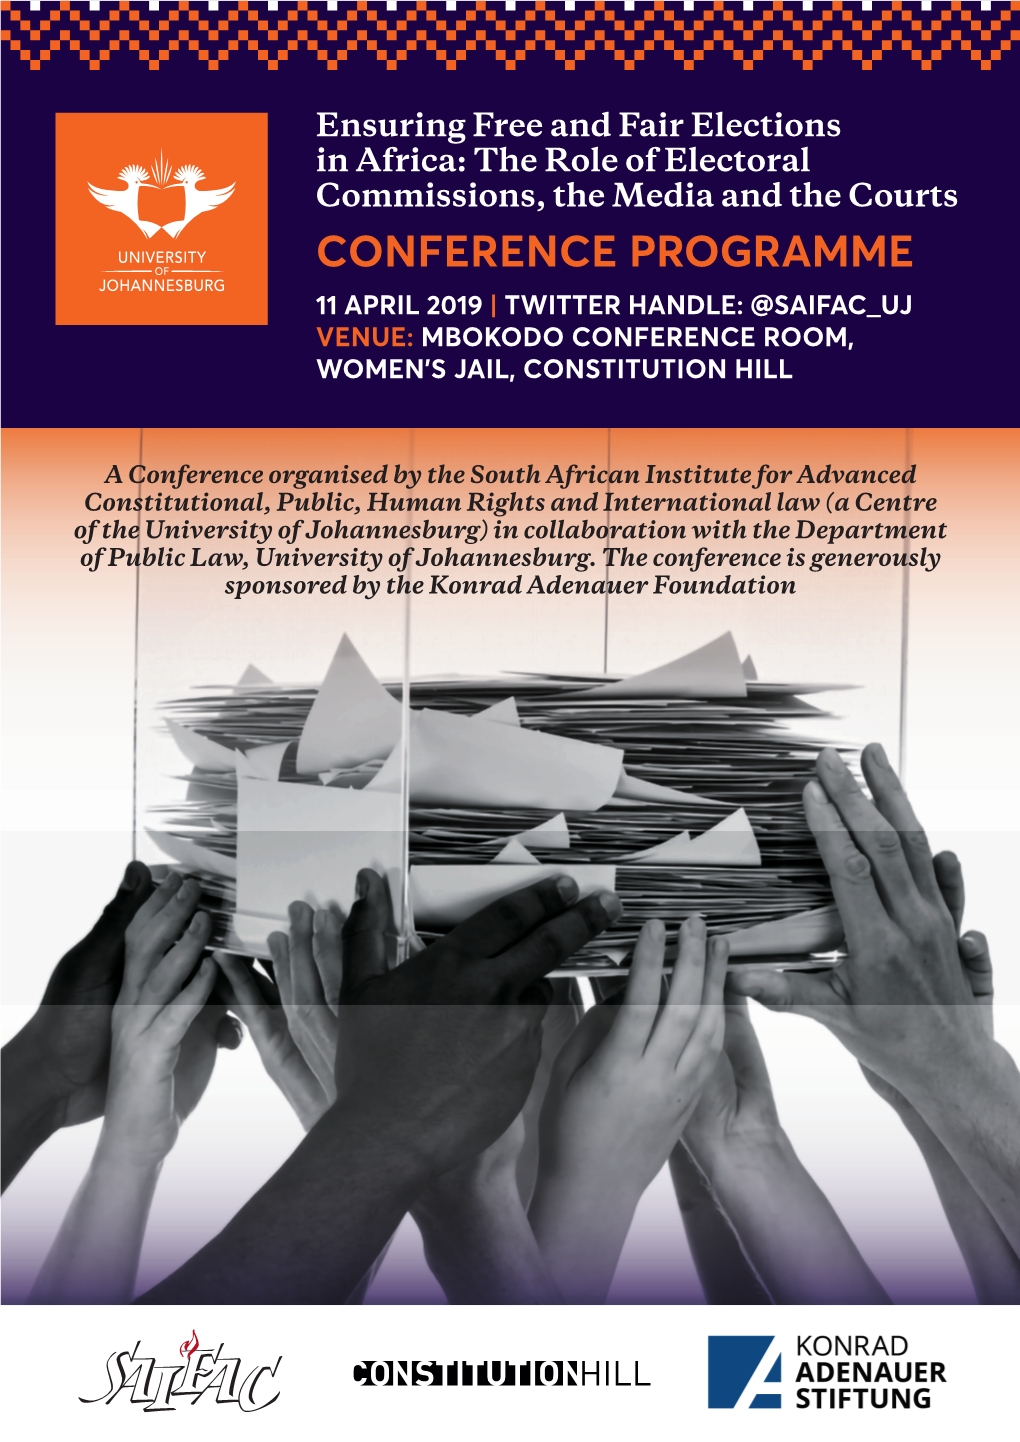 Conference Programme 11 April 2019 | Twitter Handle: @Saifac Uj Venue: Mbokodo Conference Room, Women’S Jail, Constitution Hill